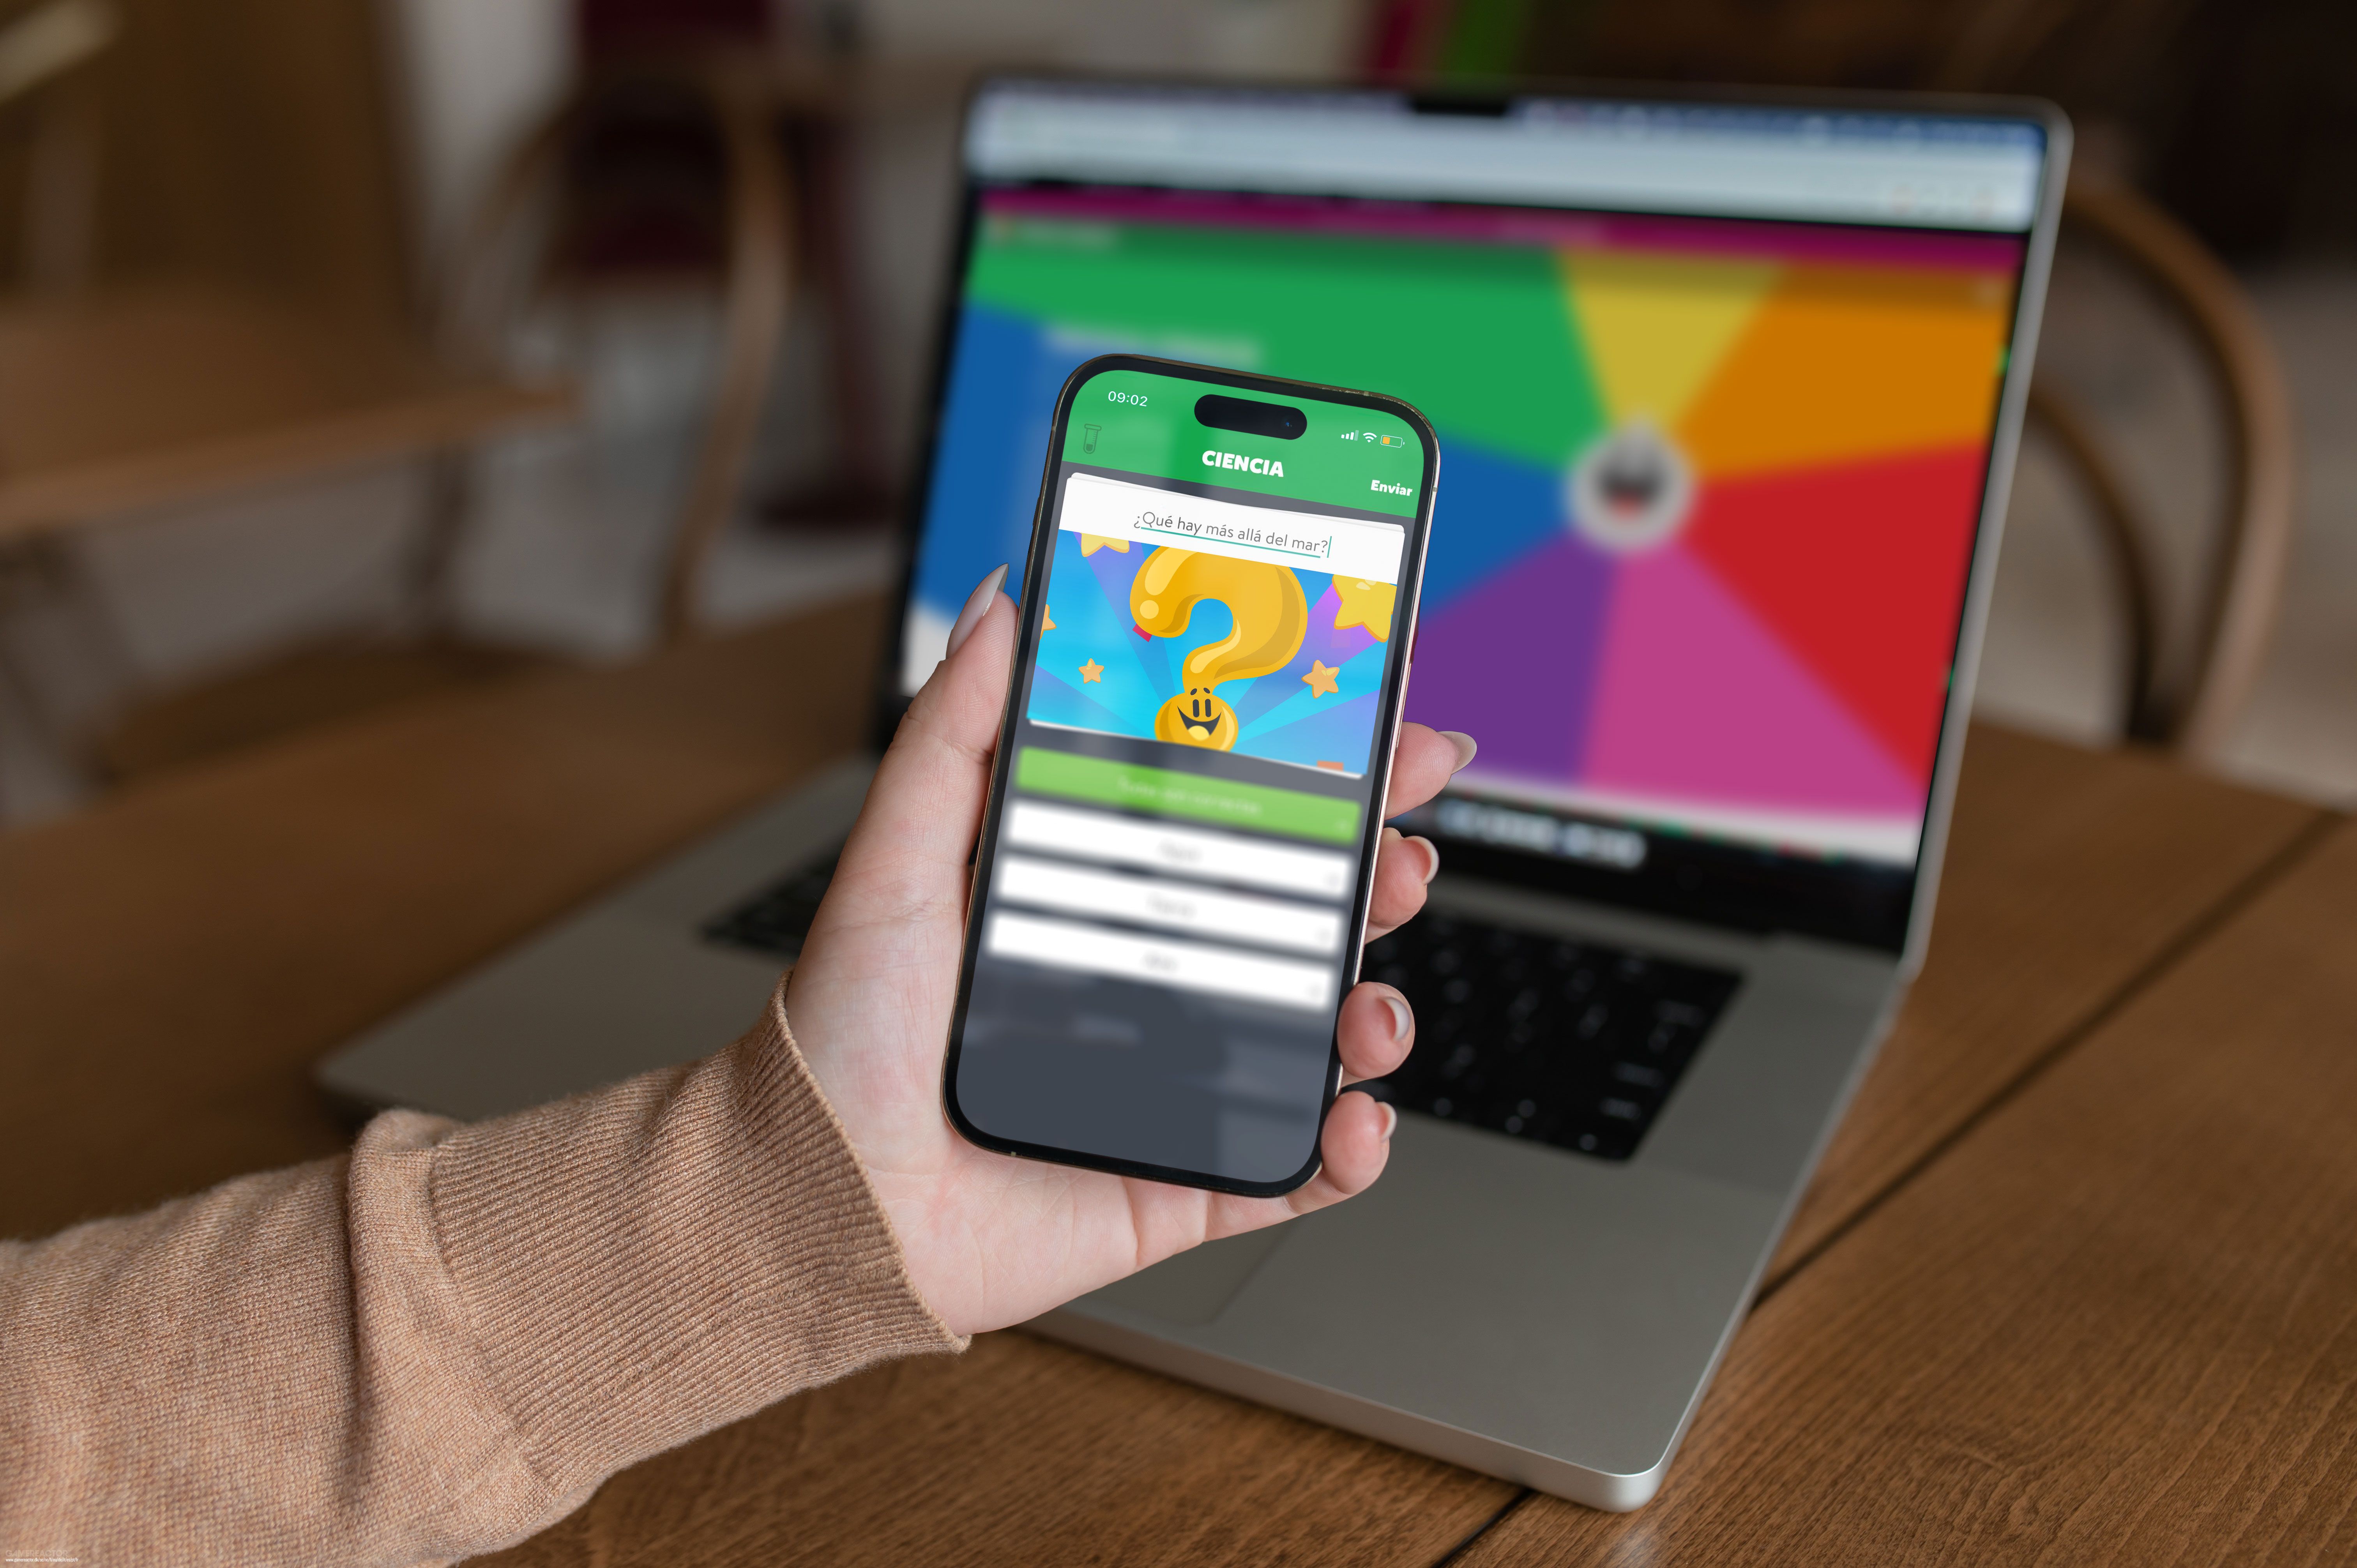 Trivia Crack celebrates its tenth anniversary with Ask Us Day